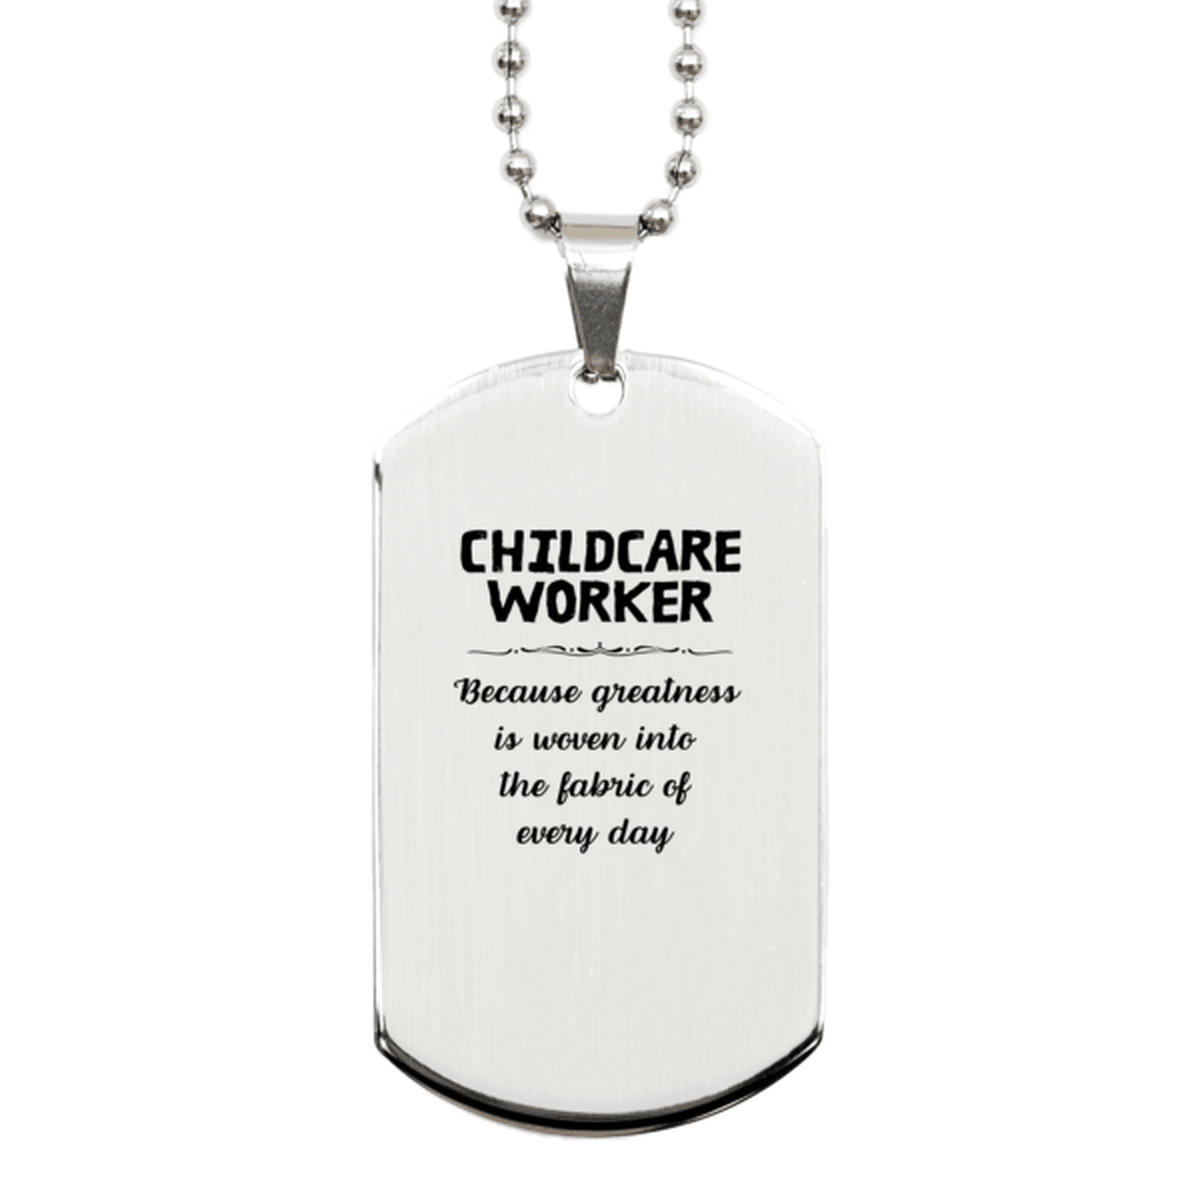 Sarcastic Childcare Worker Silver Dog Tag Gifts, Christmas Holiday Gifts for Childcare Worker Birthday, Childcare Worker: Because greatness is woven into the fabric of every day, Coworkers, Friends - Mallard Moon Gift Shop